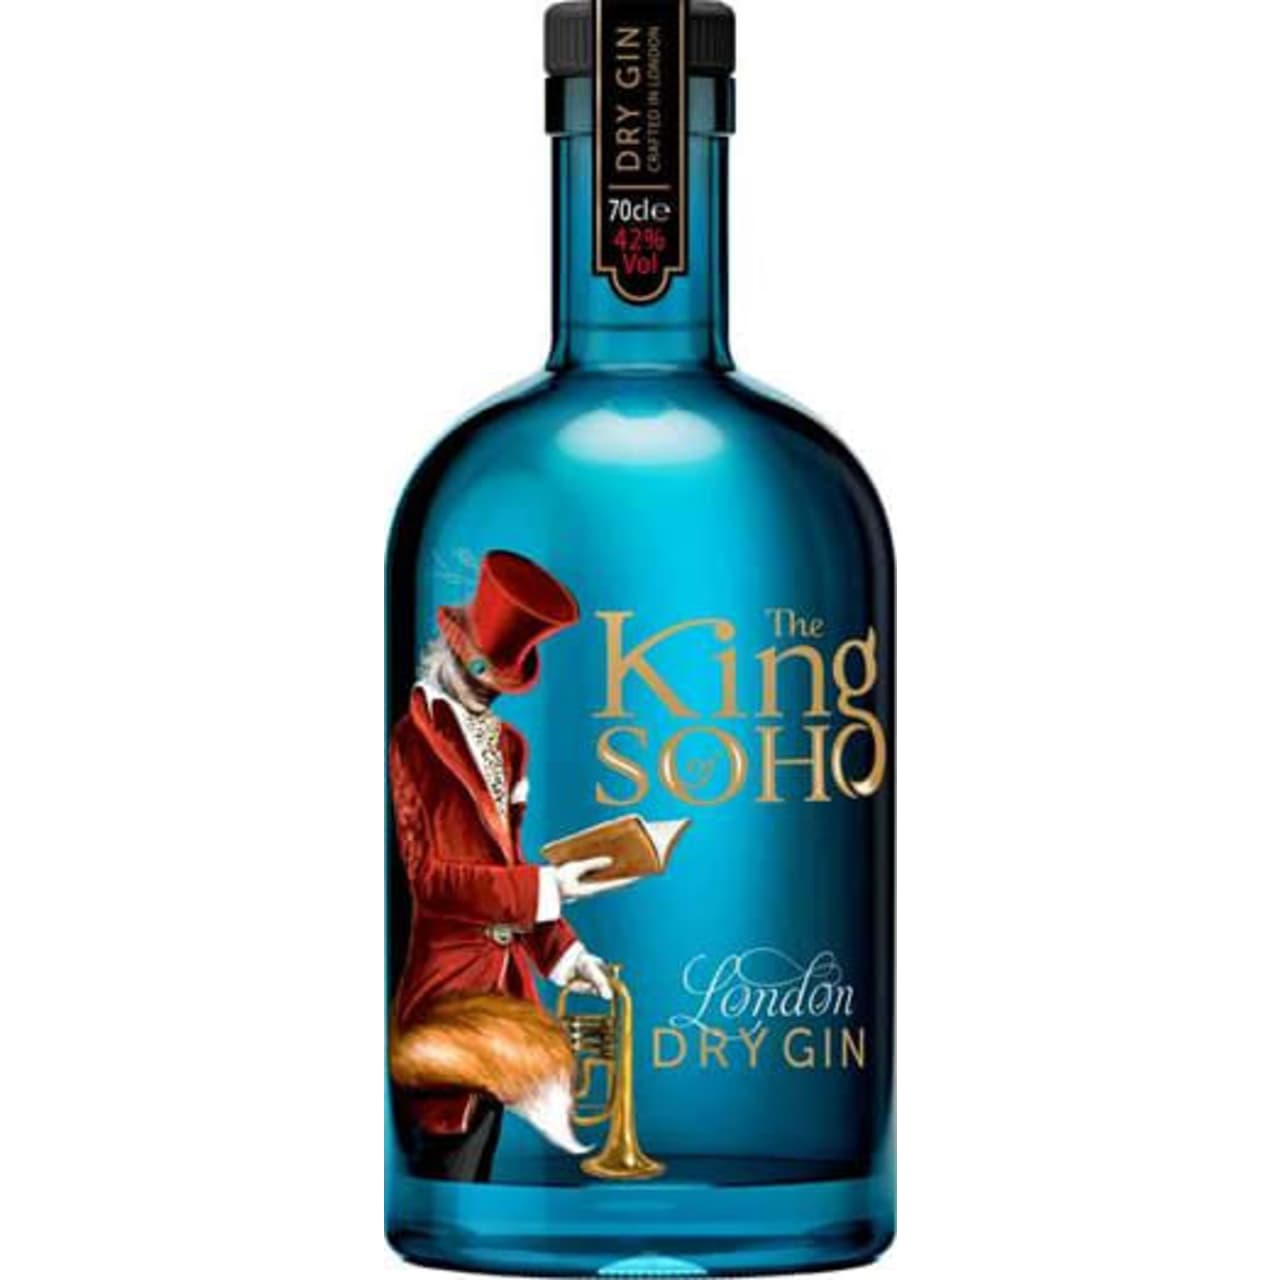 The King of Soho is a London Dry Gin distilled in the heart of London using traditional methods; a complex spirit crafted with 12 botanicals to our unique flavour profile.